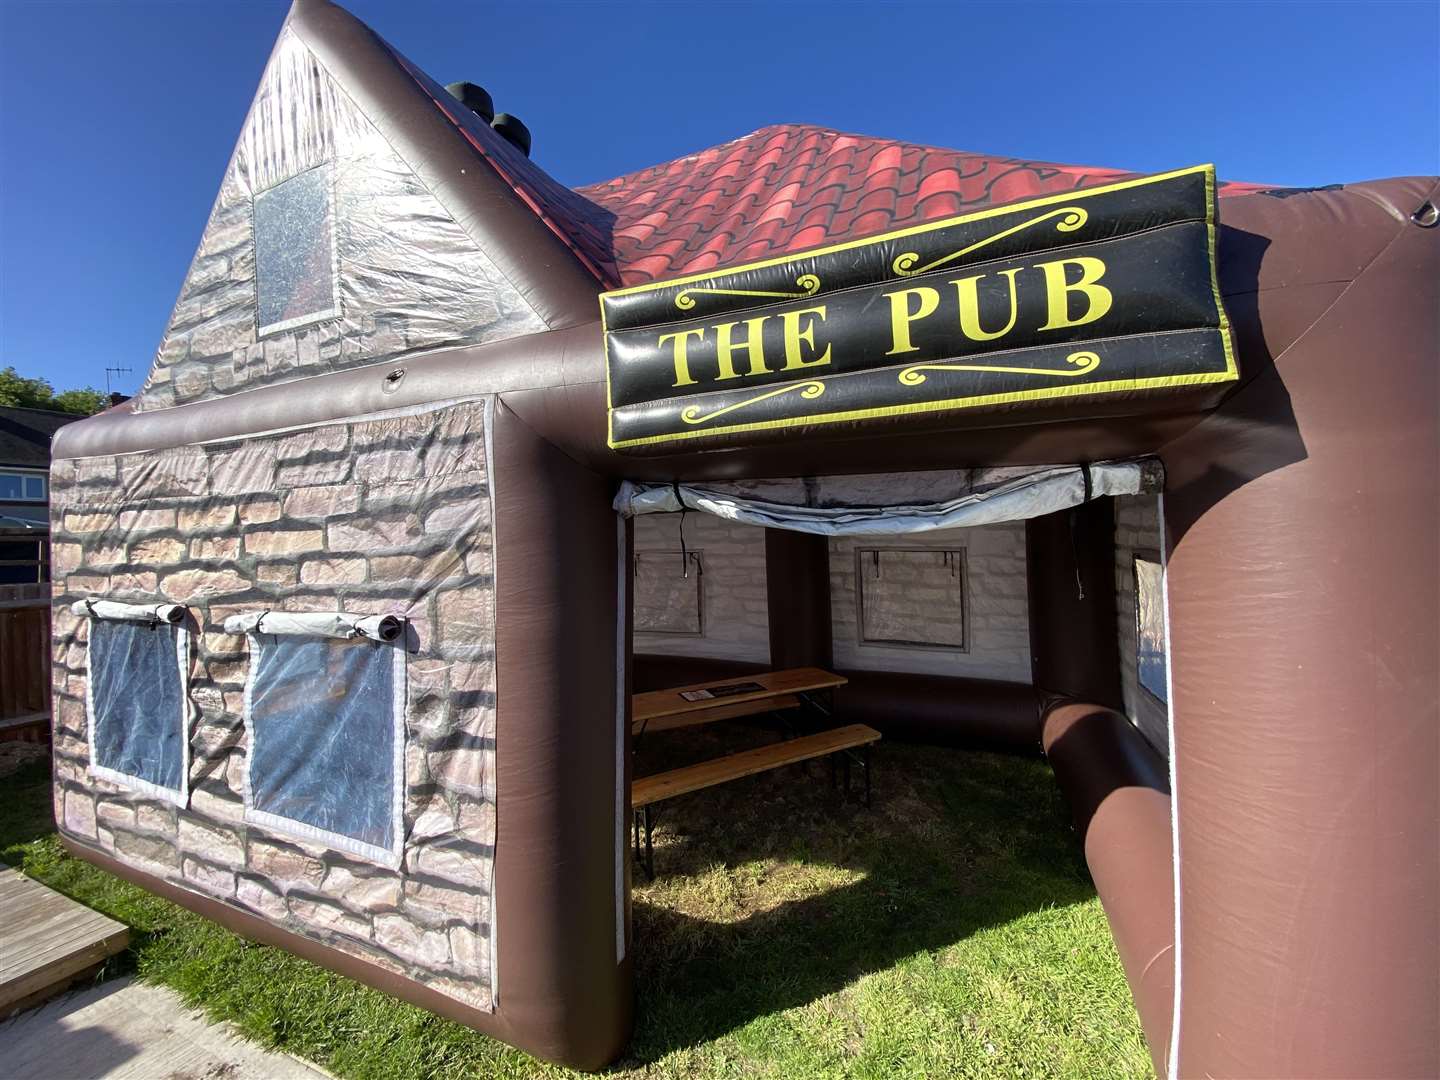 Richard Martin, 35, from Gravesend, owns an inflatable pub business called The Air of the Dog. Picture: Richard Martin